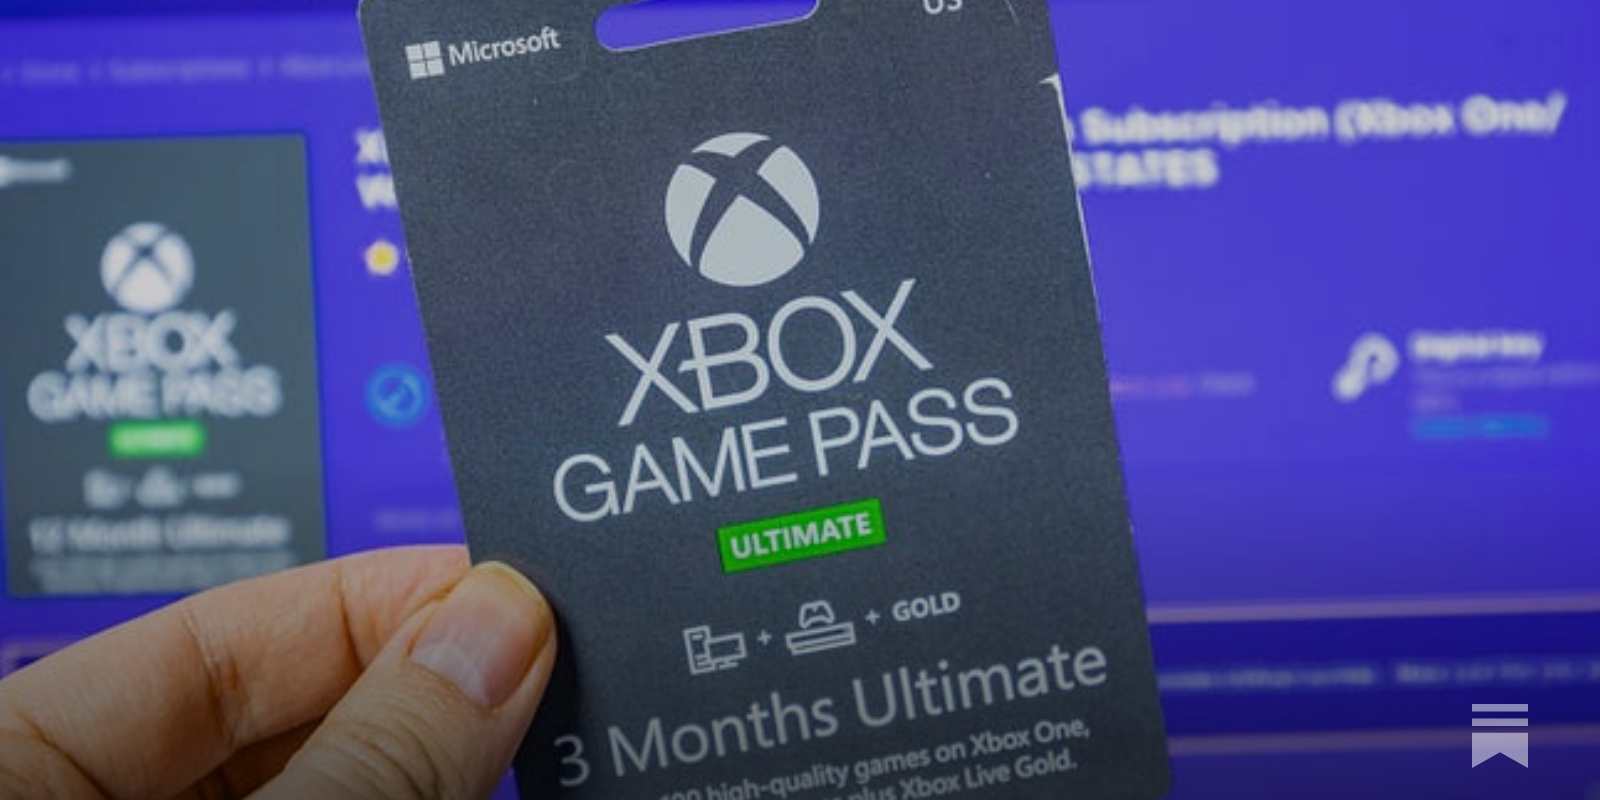 12 Months Xbox Game Pass Ultimate, Console + PC